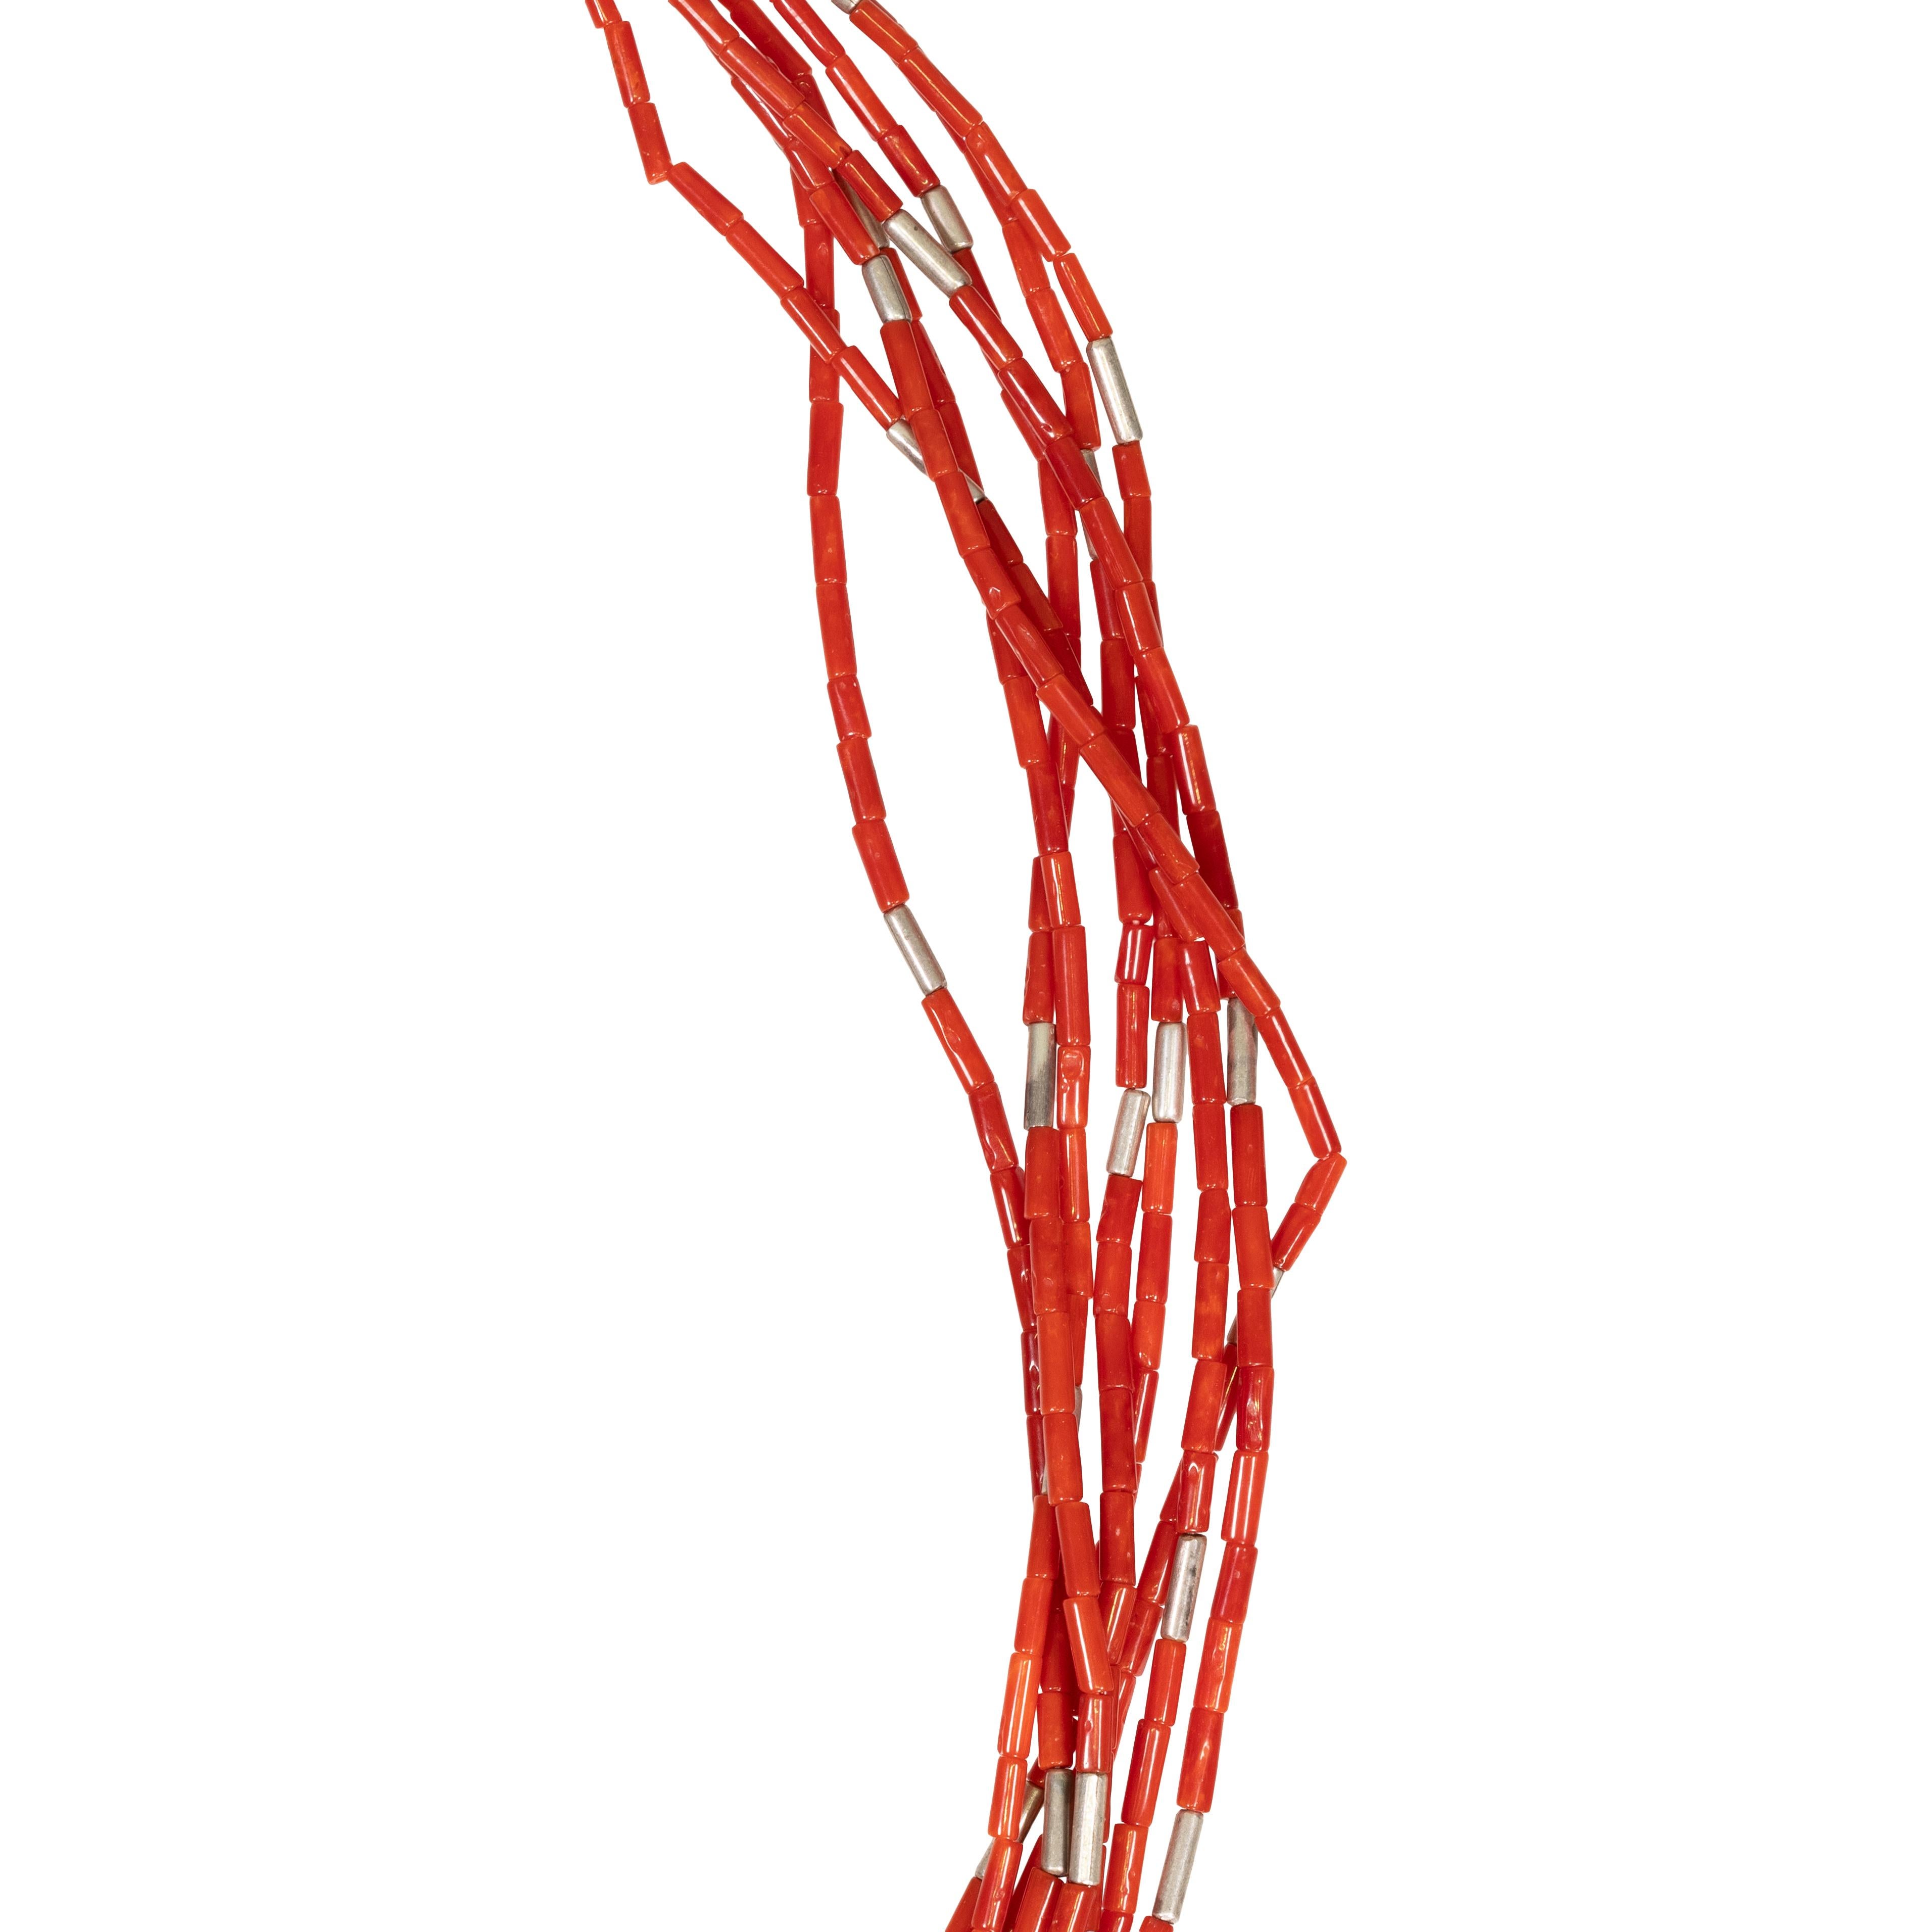 Santo Domingo beaded coral necklace. Featuring eight strands strung with coral and sterling having traditional cord wrapping. Beads are exceptionally small and fine with deep scarlet coloring. Would make the perfect finishing touch for a casual or